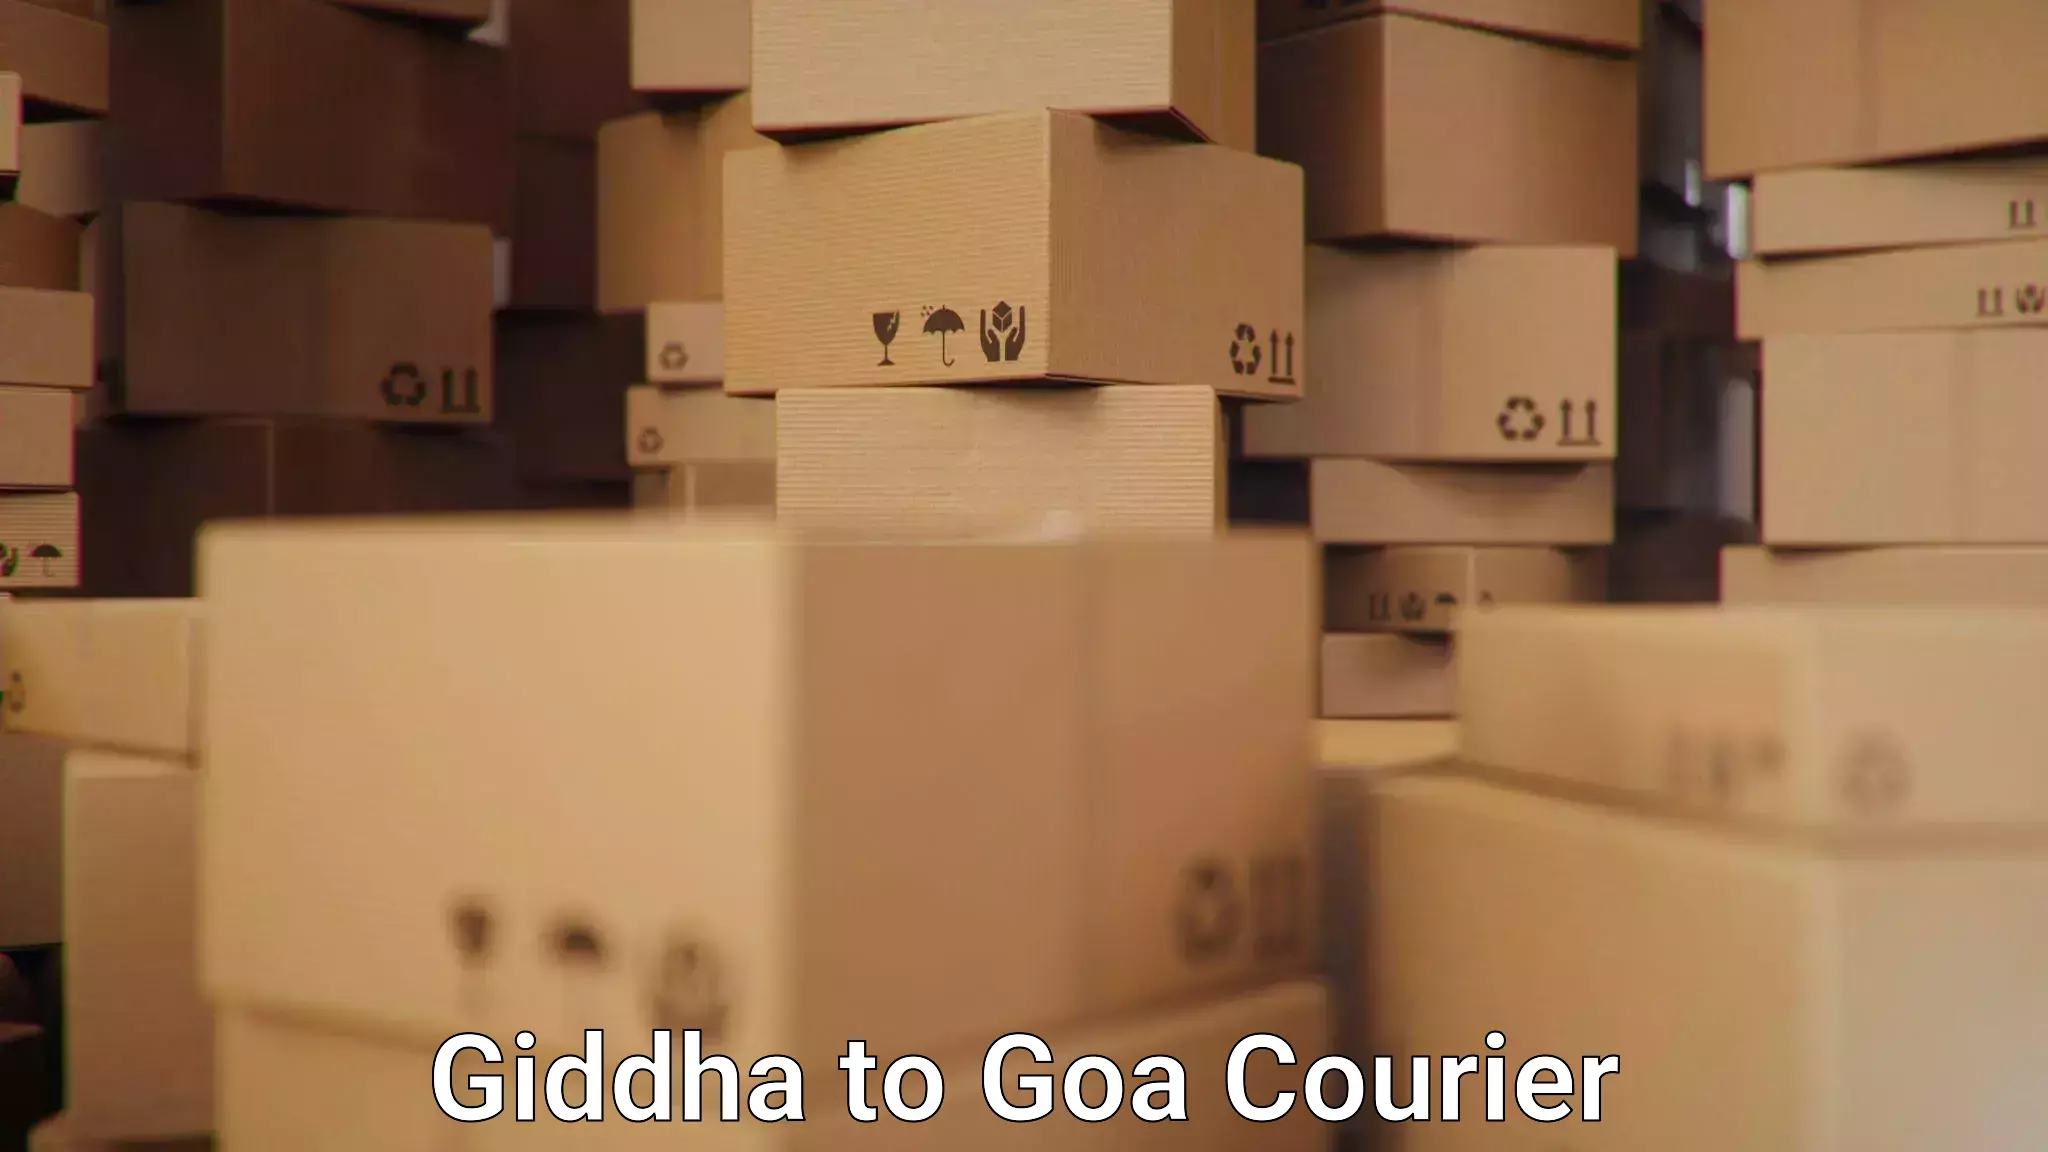 Cash on delivery service Giddha to South Goa